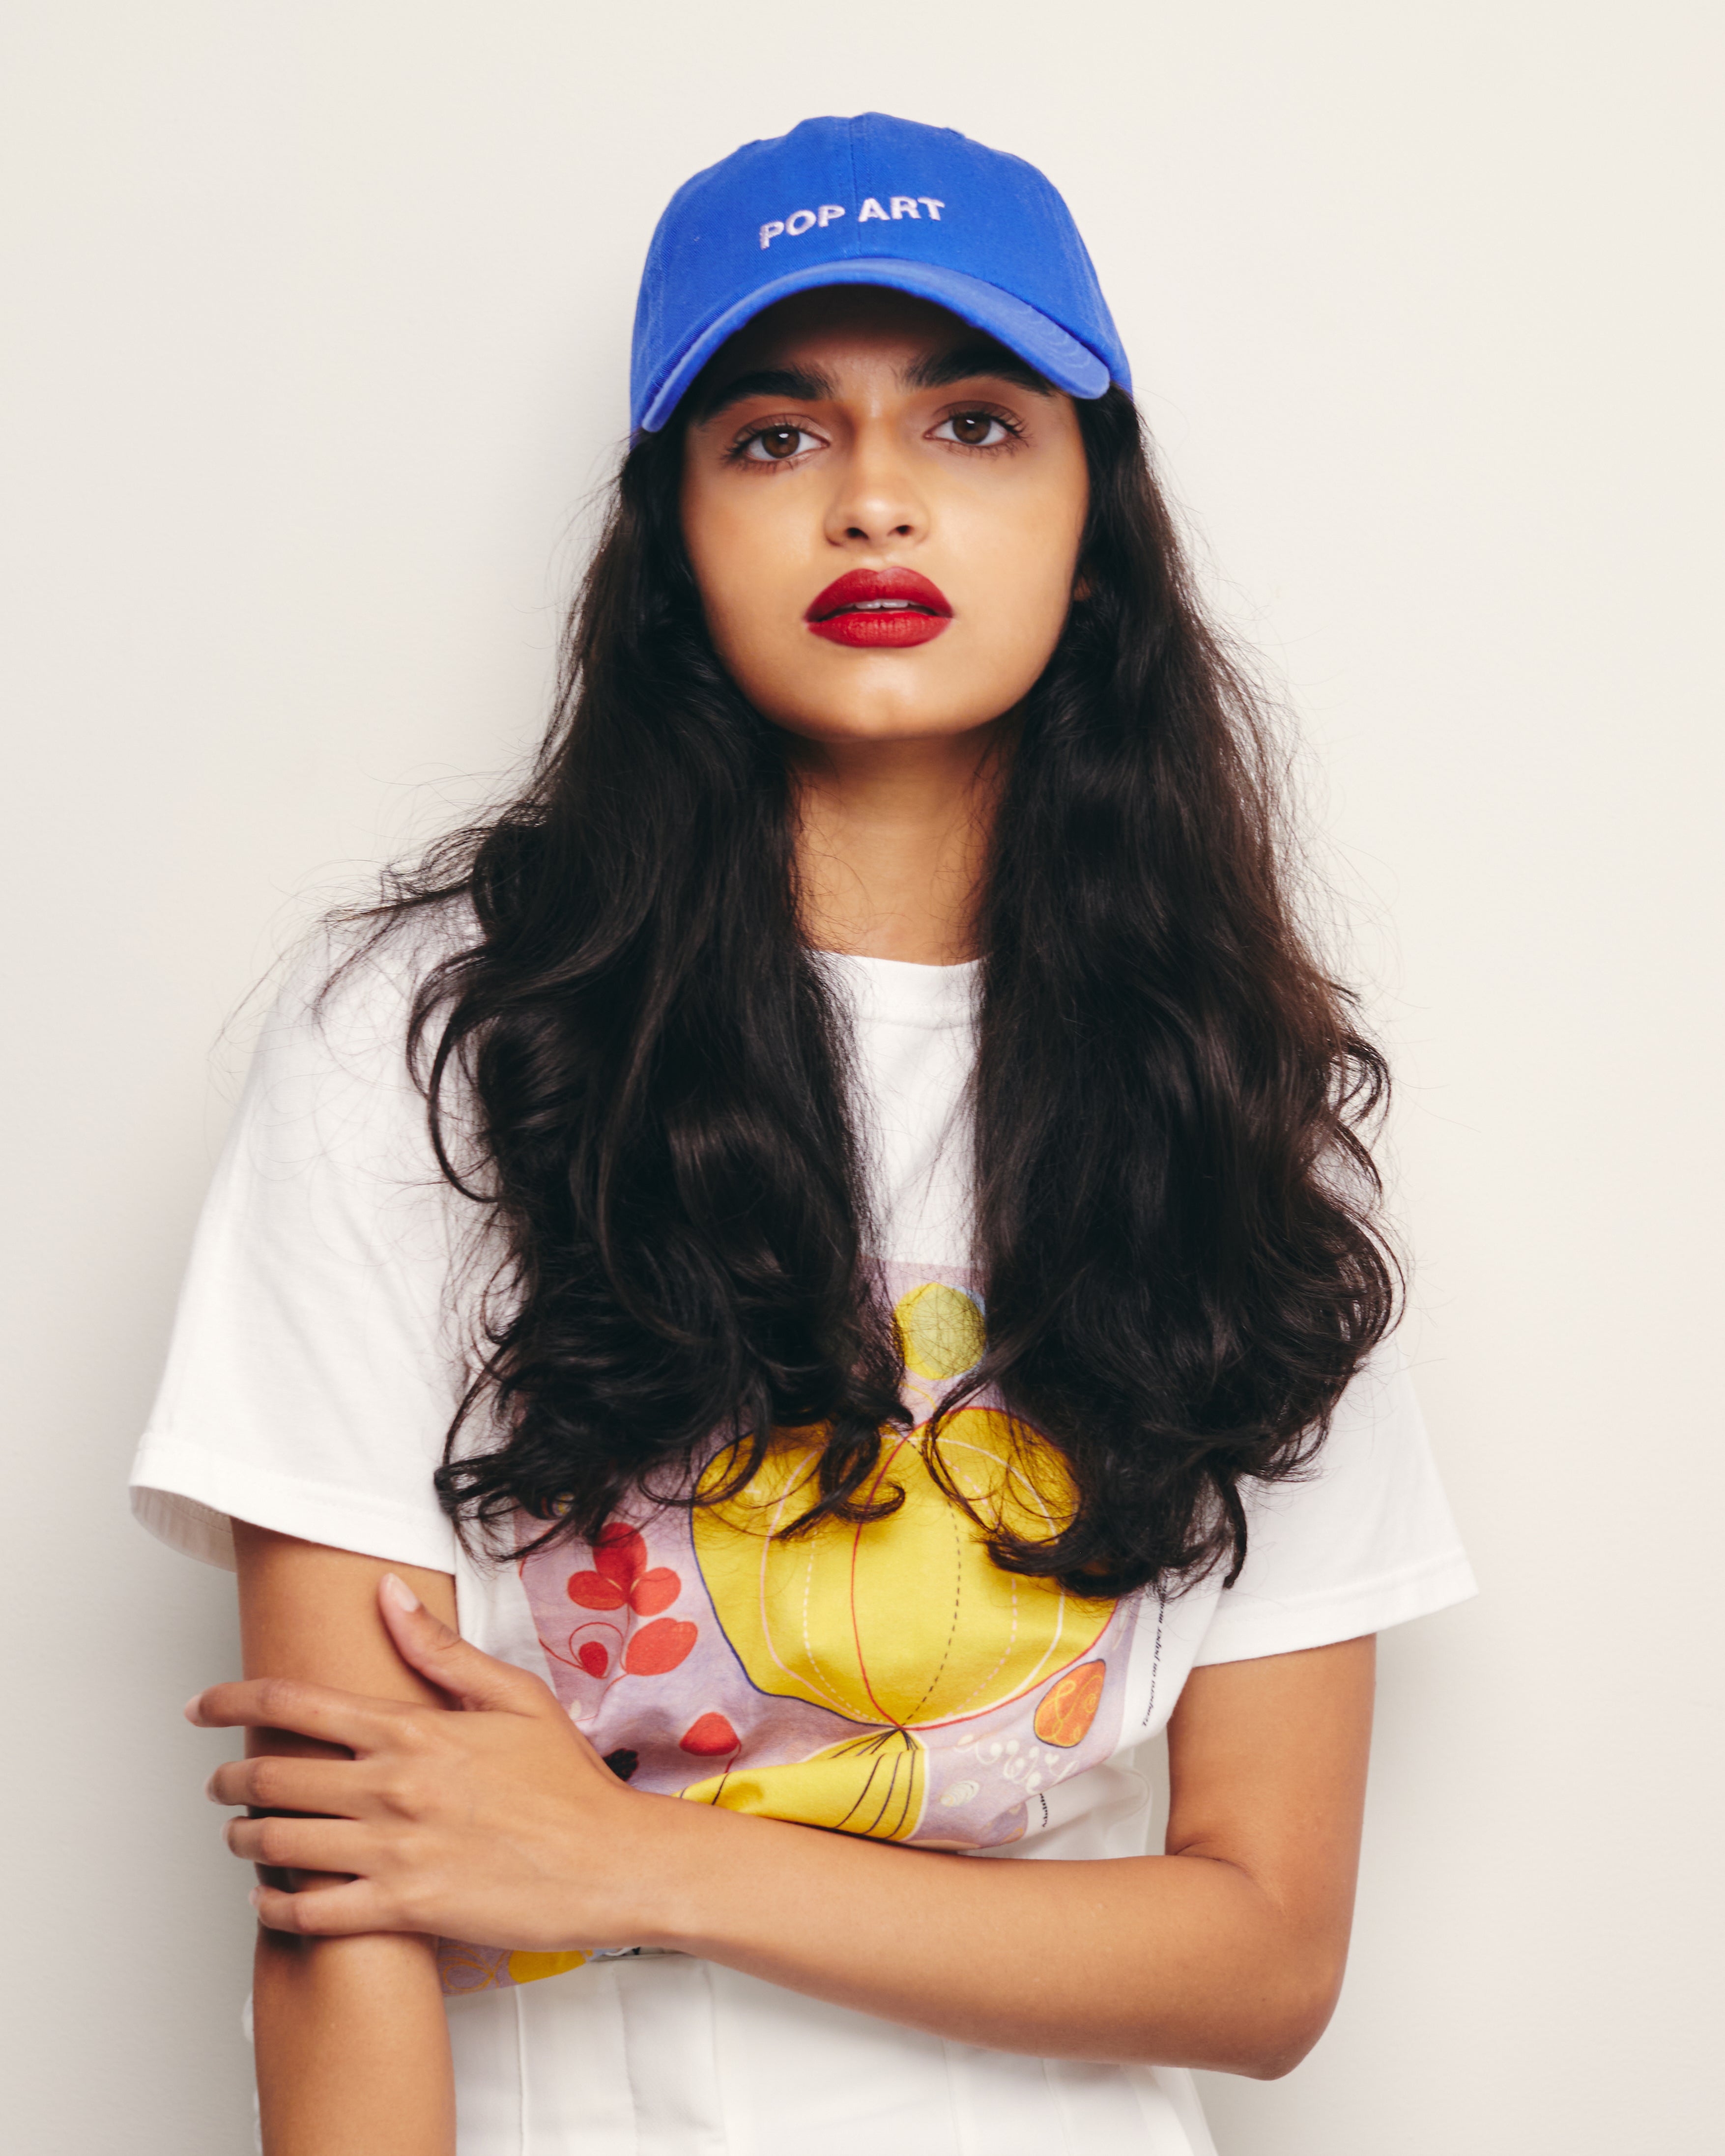 Mira Bhat Wears Royal Blue Baseball Cap / Dad Hat and 100% Organic Cotton Tee in White with Hilma af Klint Graphic Print Abstract Expressionism Art Movement Ten Largest Series Paintings